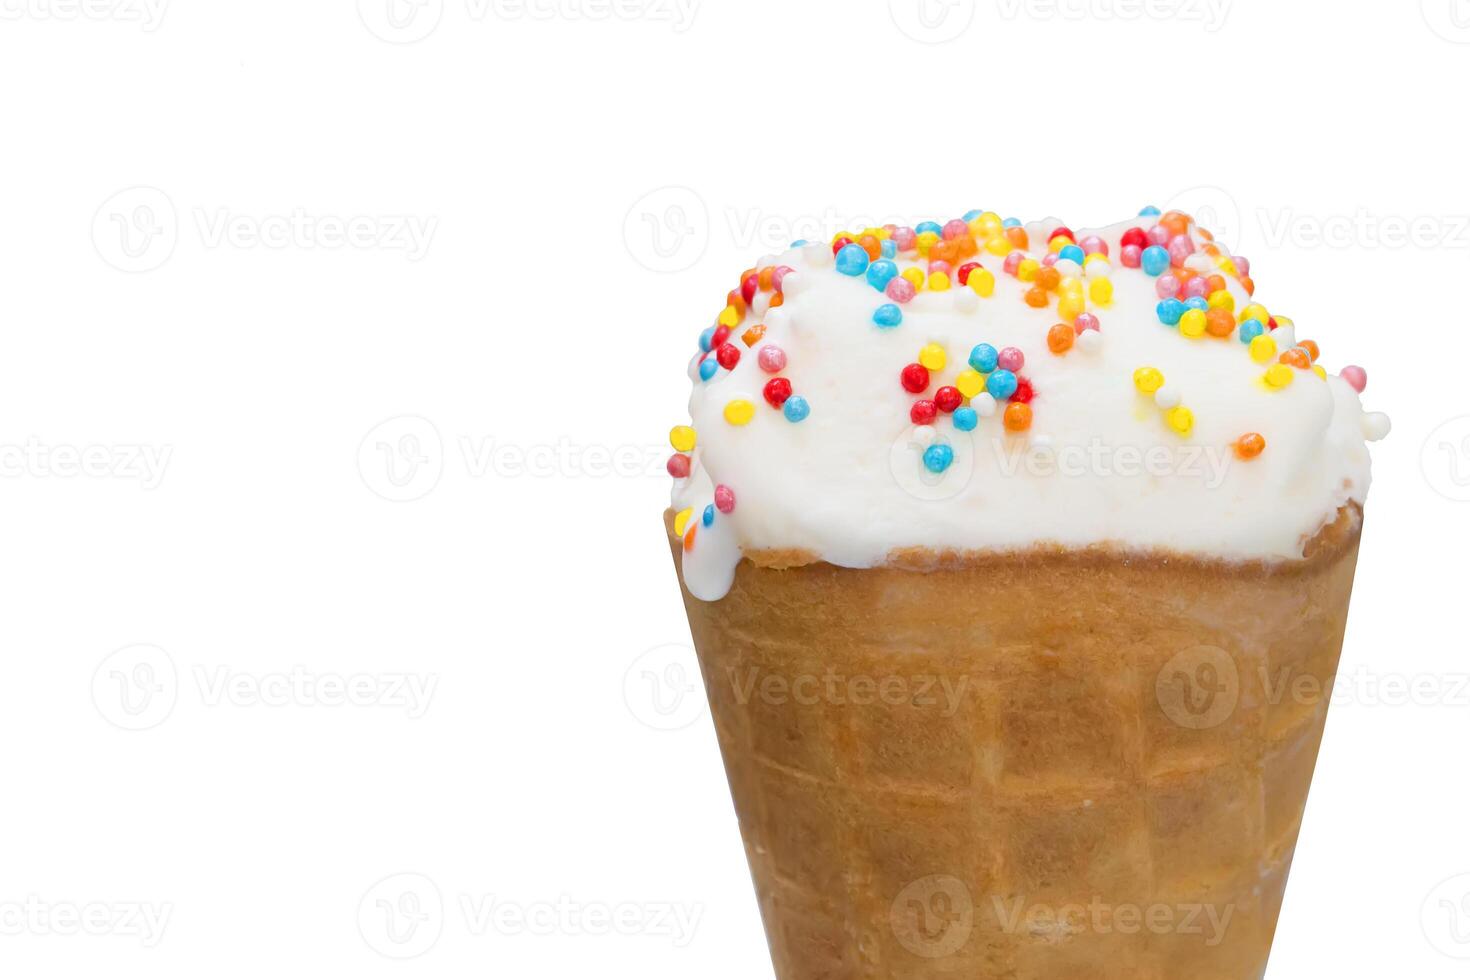 Ice cream close up on white background. White ice cream scoop in a waffle cone on a blue background. Sweet dessert decorated with multicolored sprinkles photo